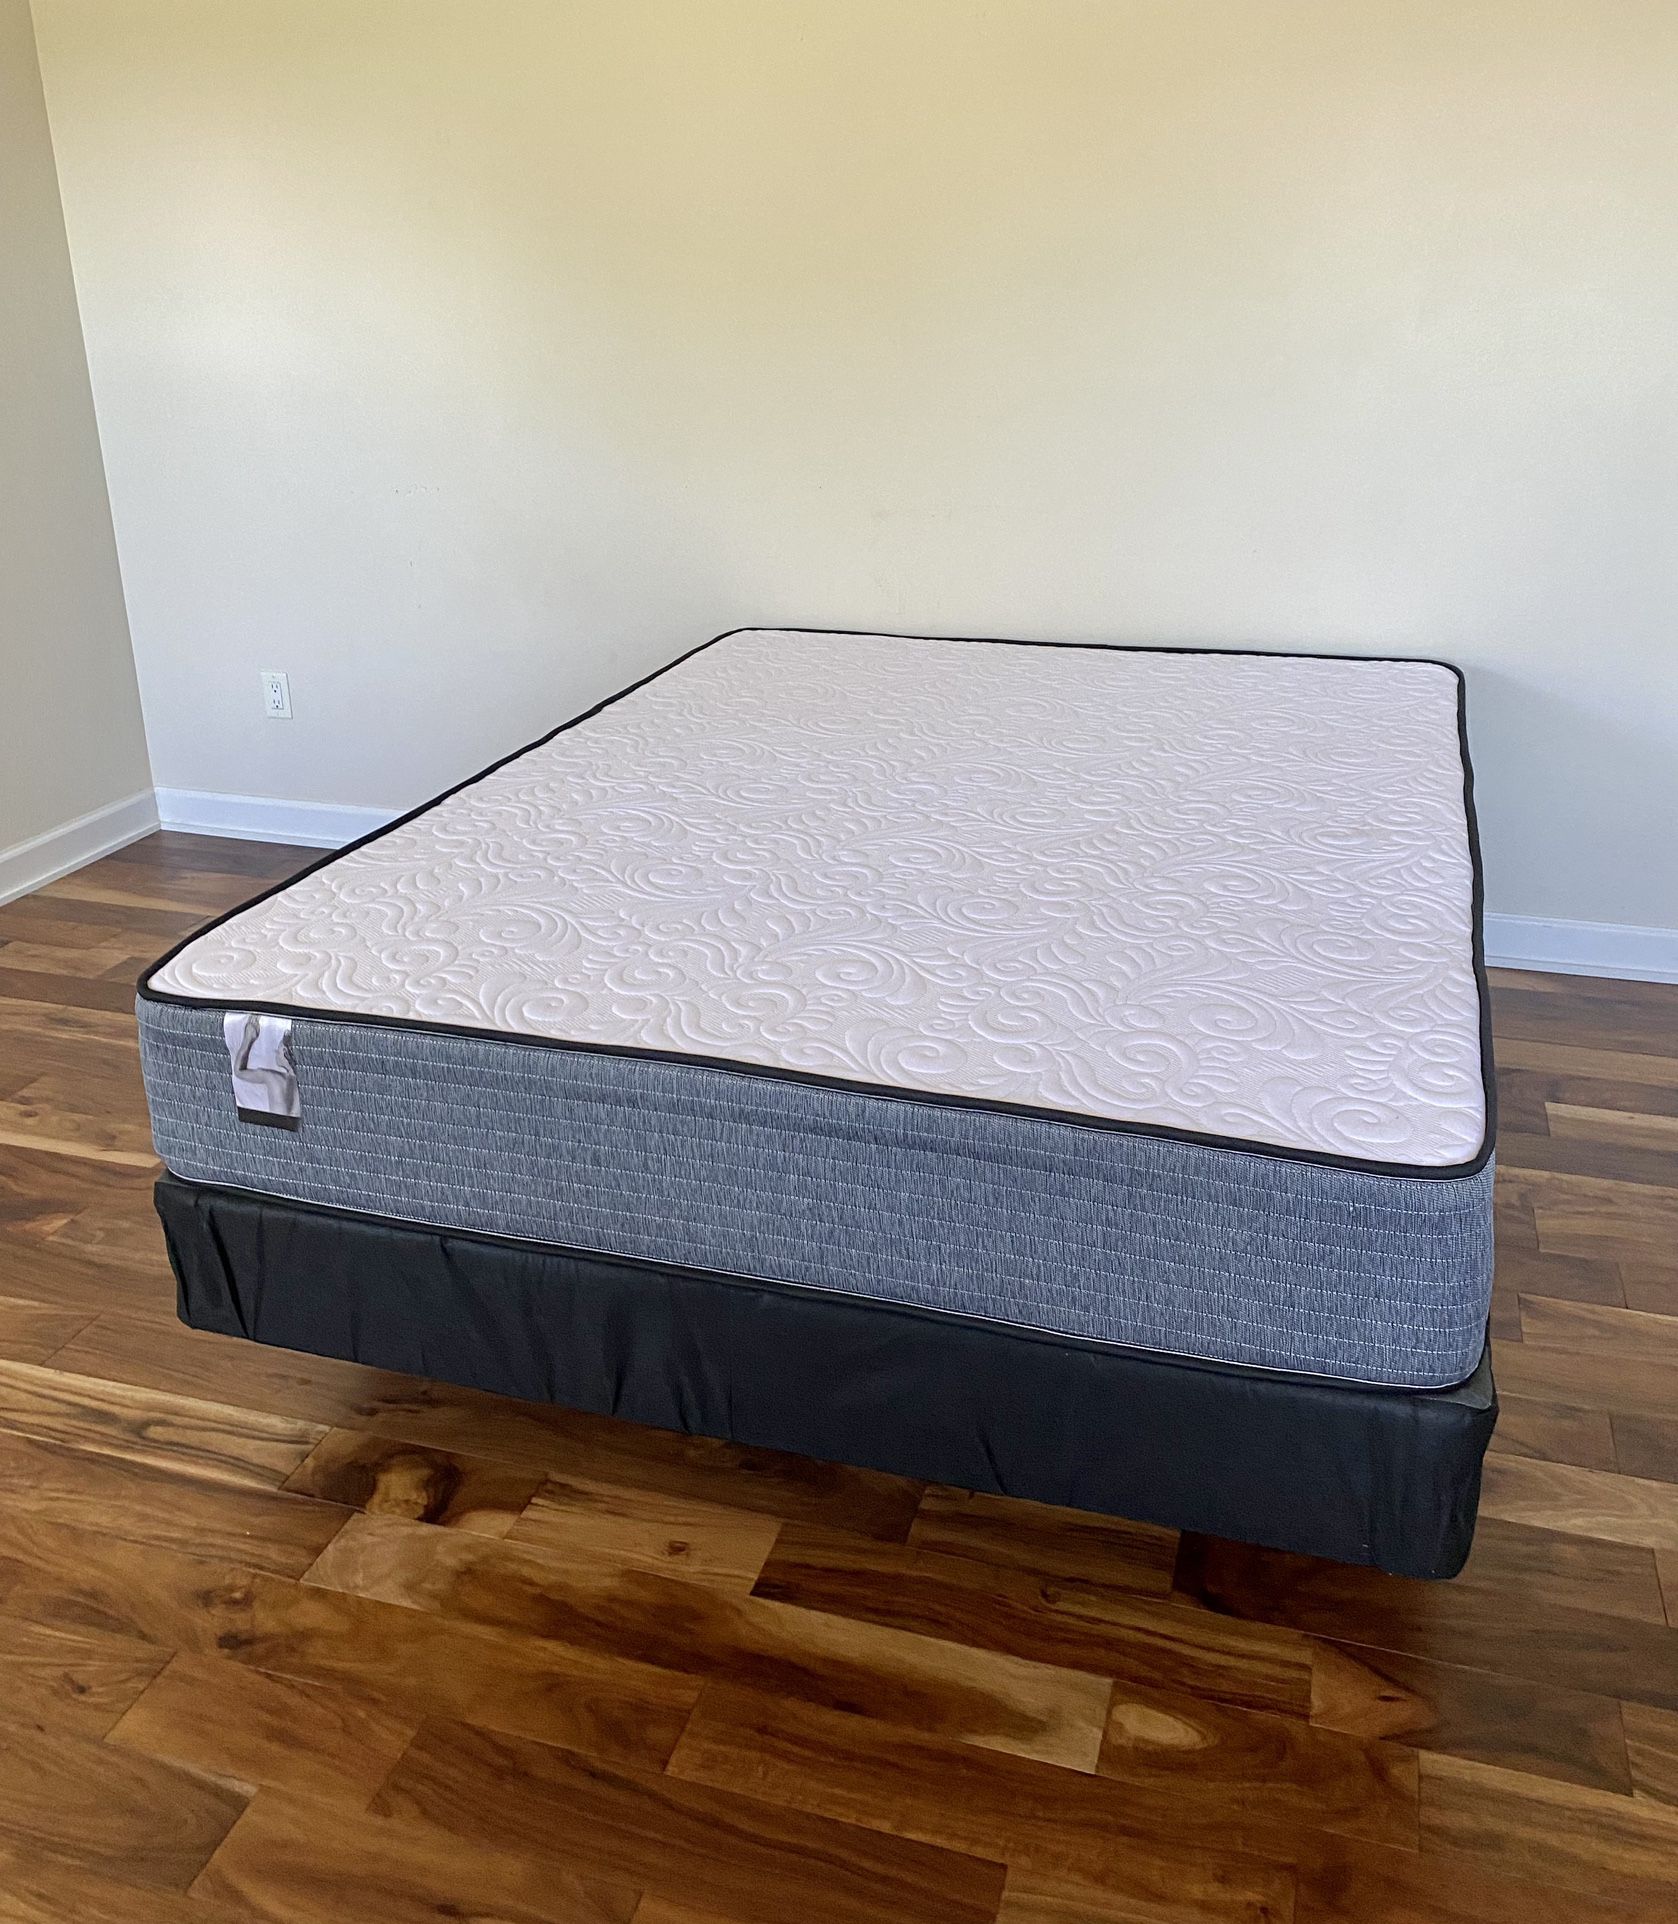 Full Size Mattress 10 Inches With Box Springs And Metal Bed Frame High Quality Available All Size. Delivery Available